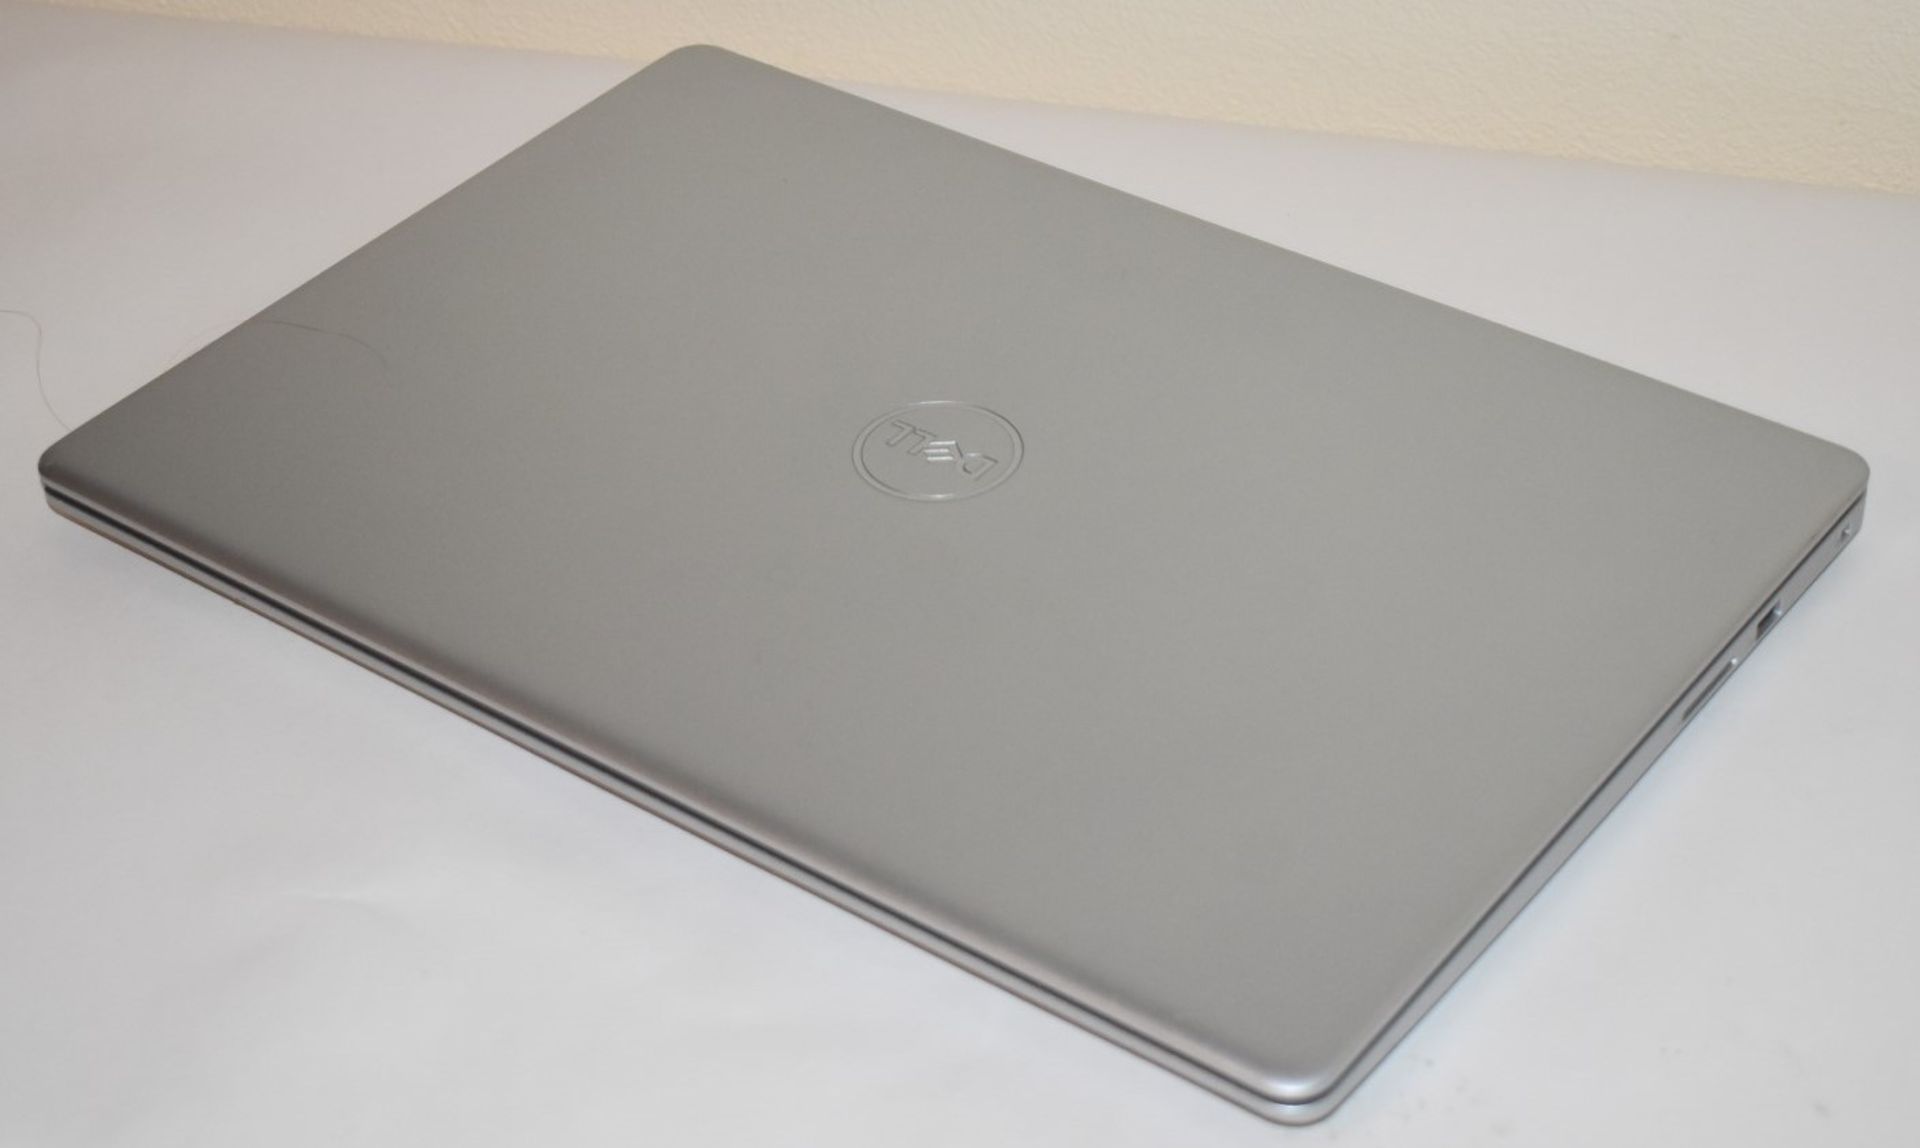 1 x Dell Inspiron 15 5593 Laptop Featuring a 10th Gen Core i5-1035G1 3.6ghz Quad Core Processor, - Image 13 of 18